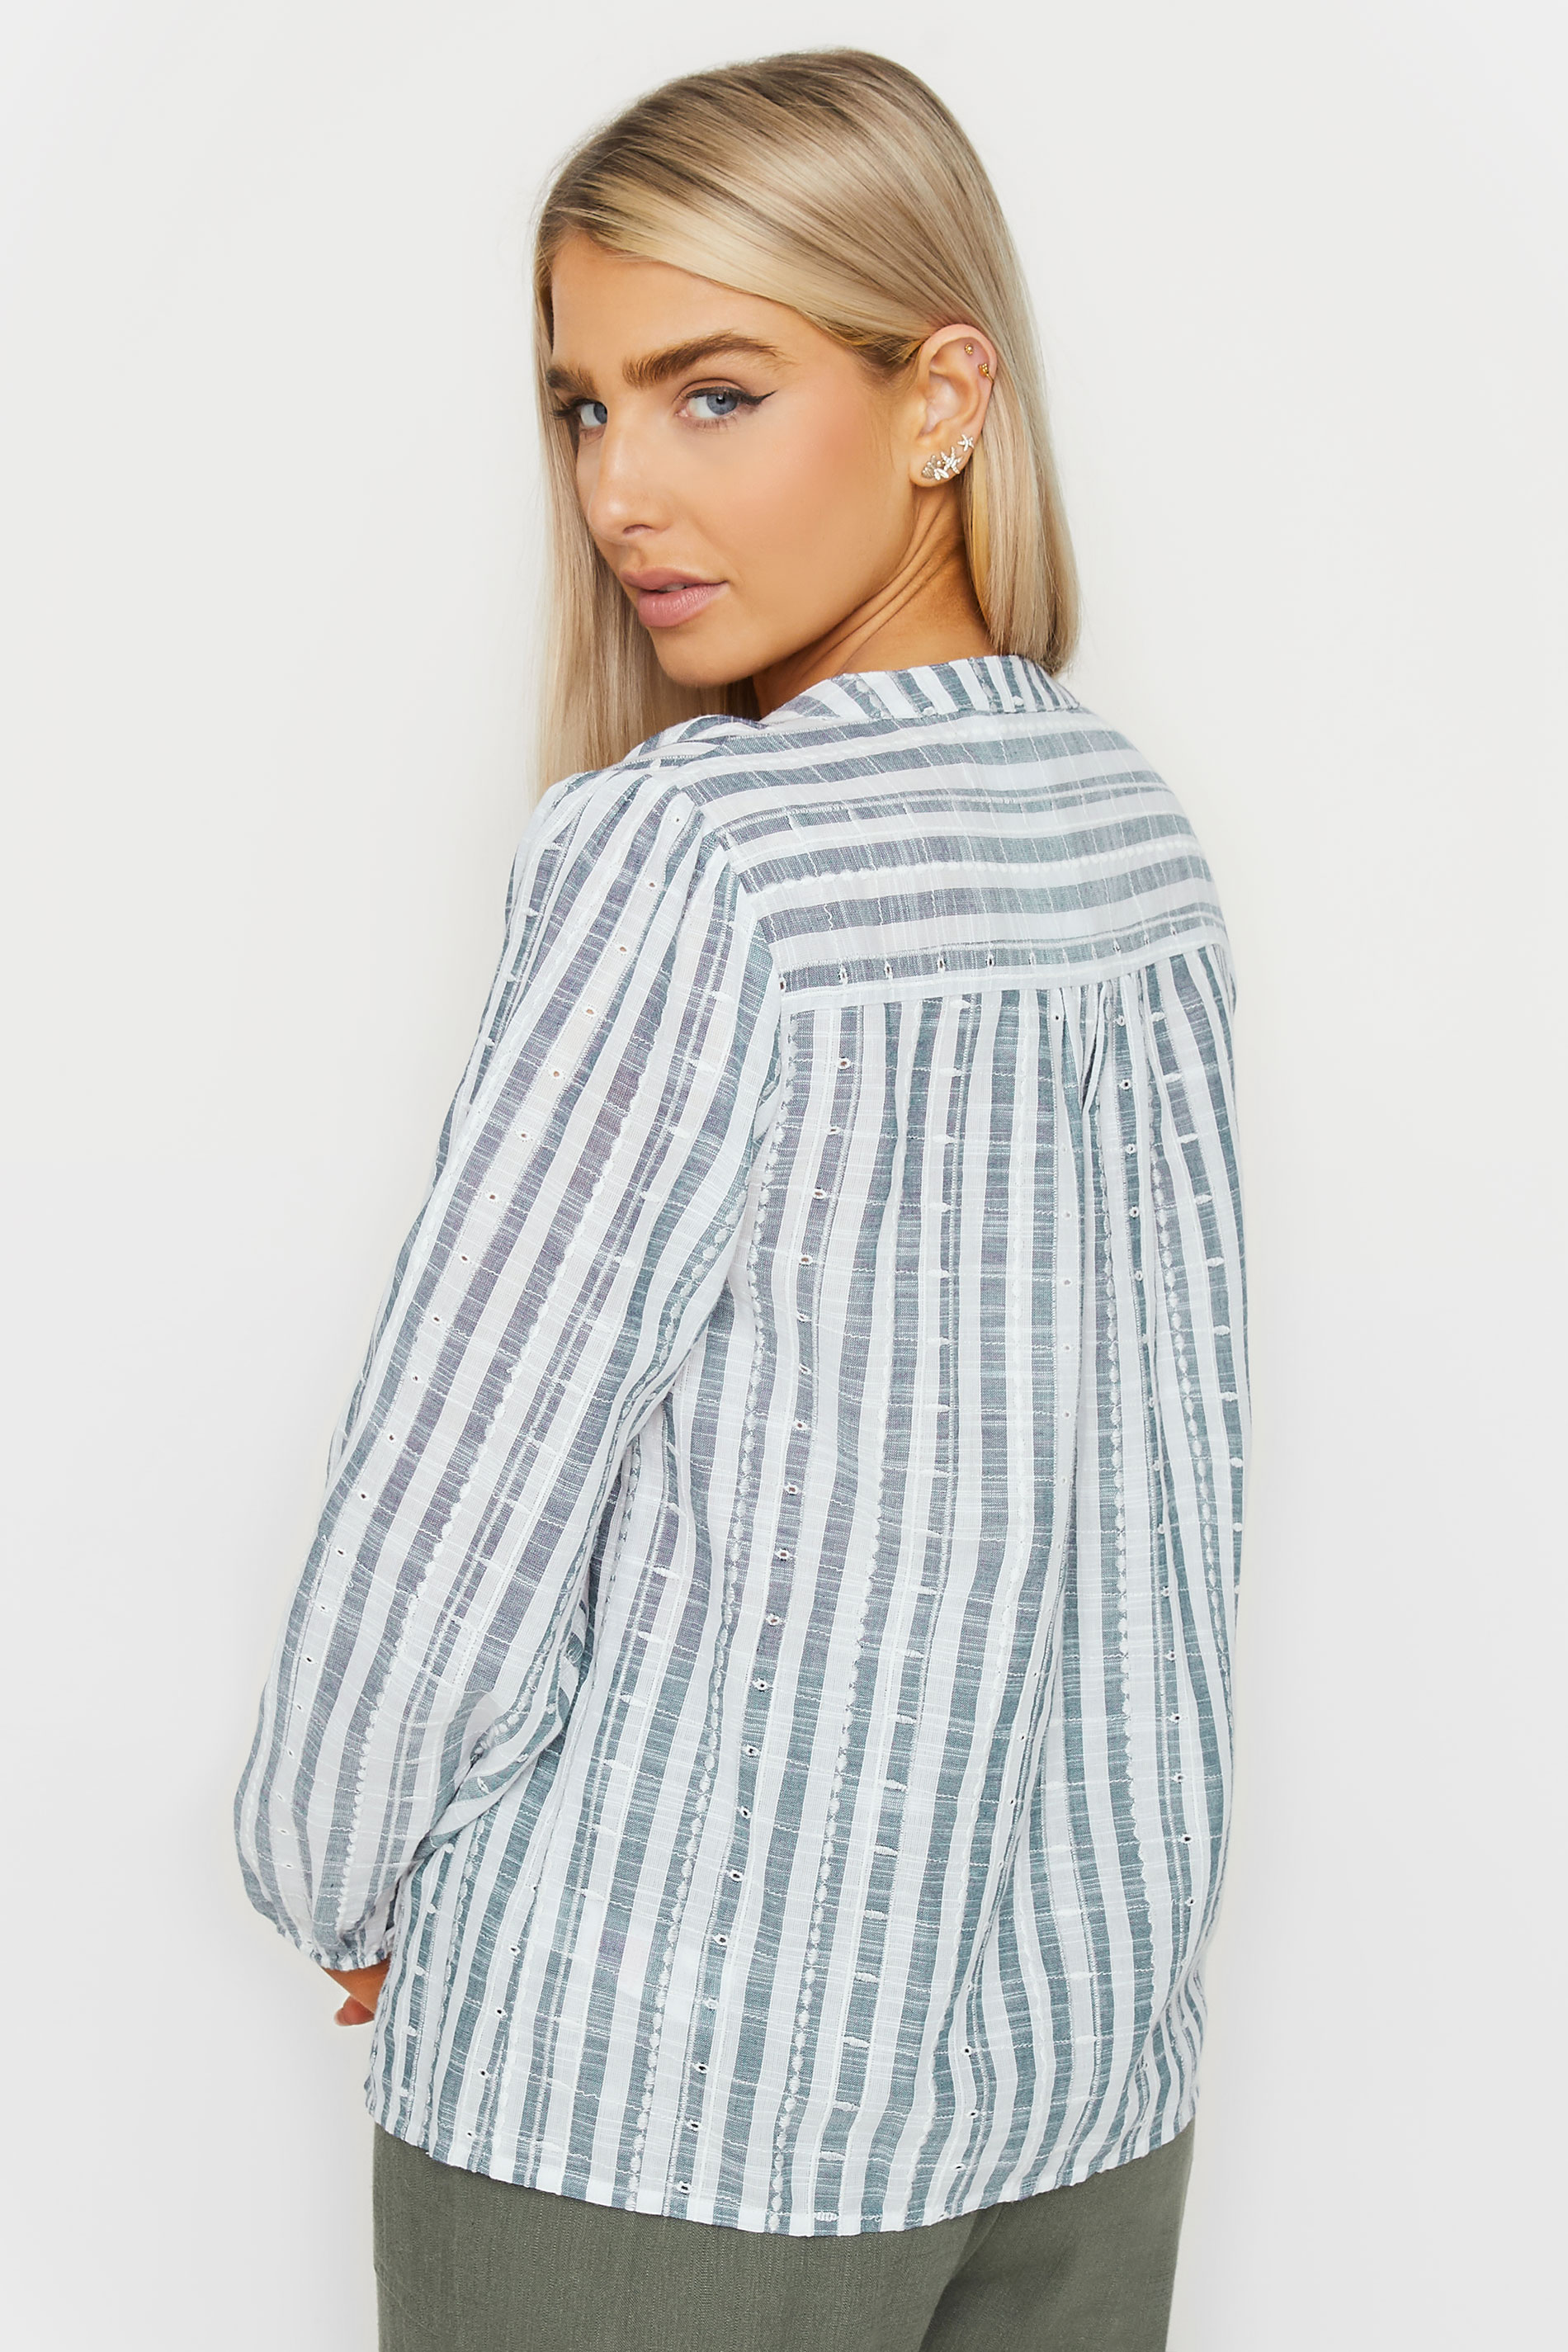 M&Co Blue & White Striped Collarless Embroidered Cotton Shirt | M&Co 3